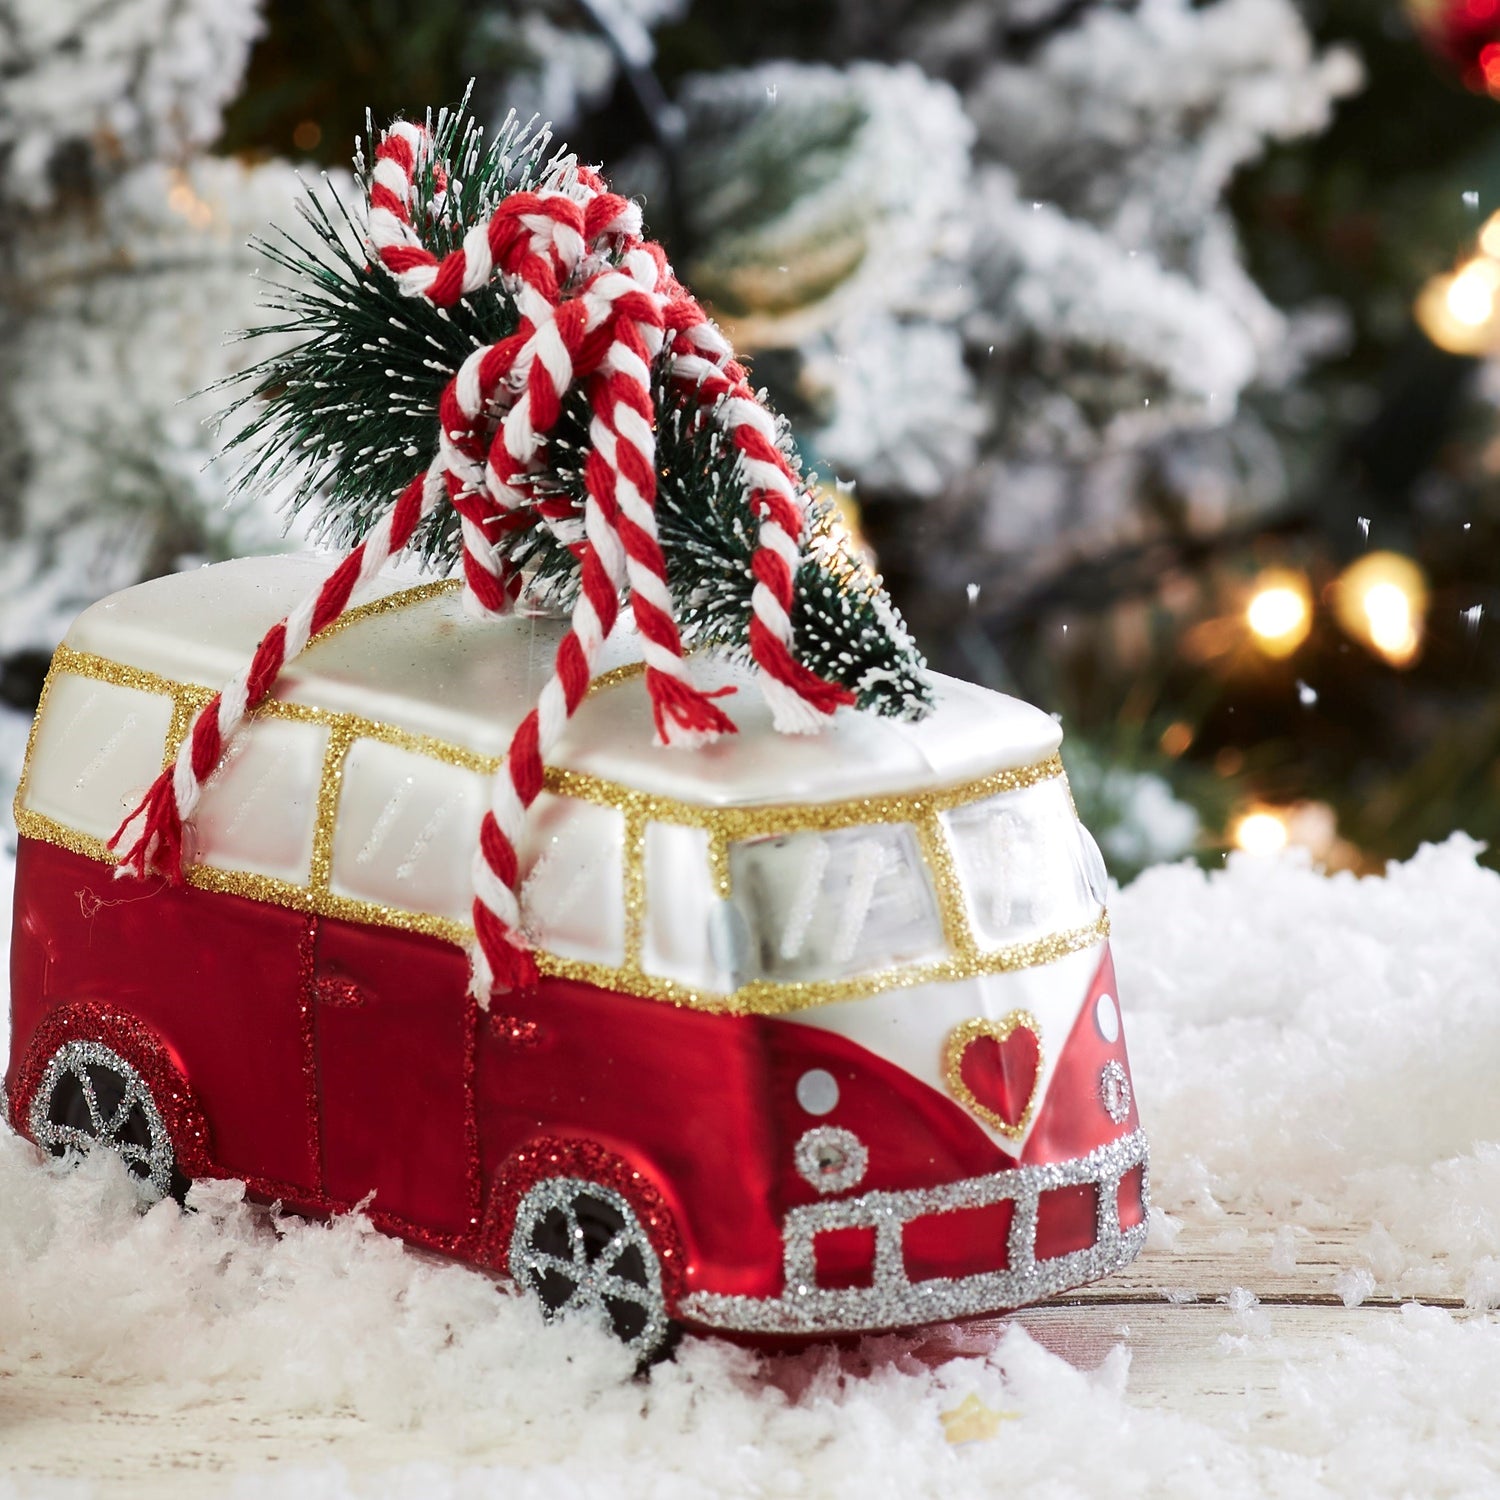 A very cool red and white camper van carrying a Christmas tree in the snow.